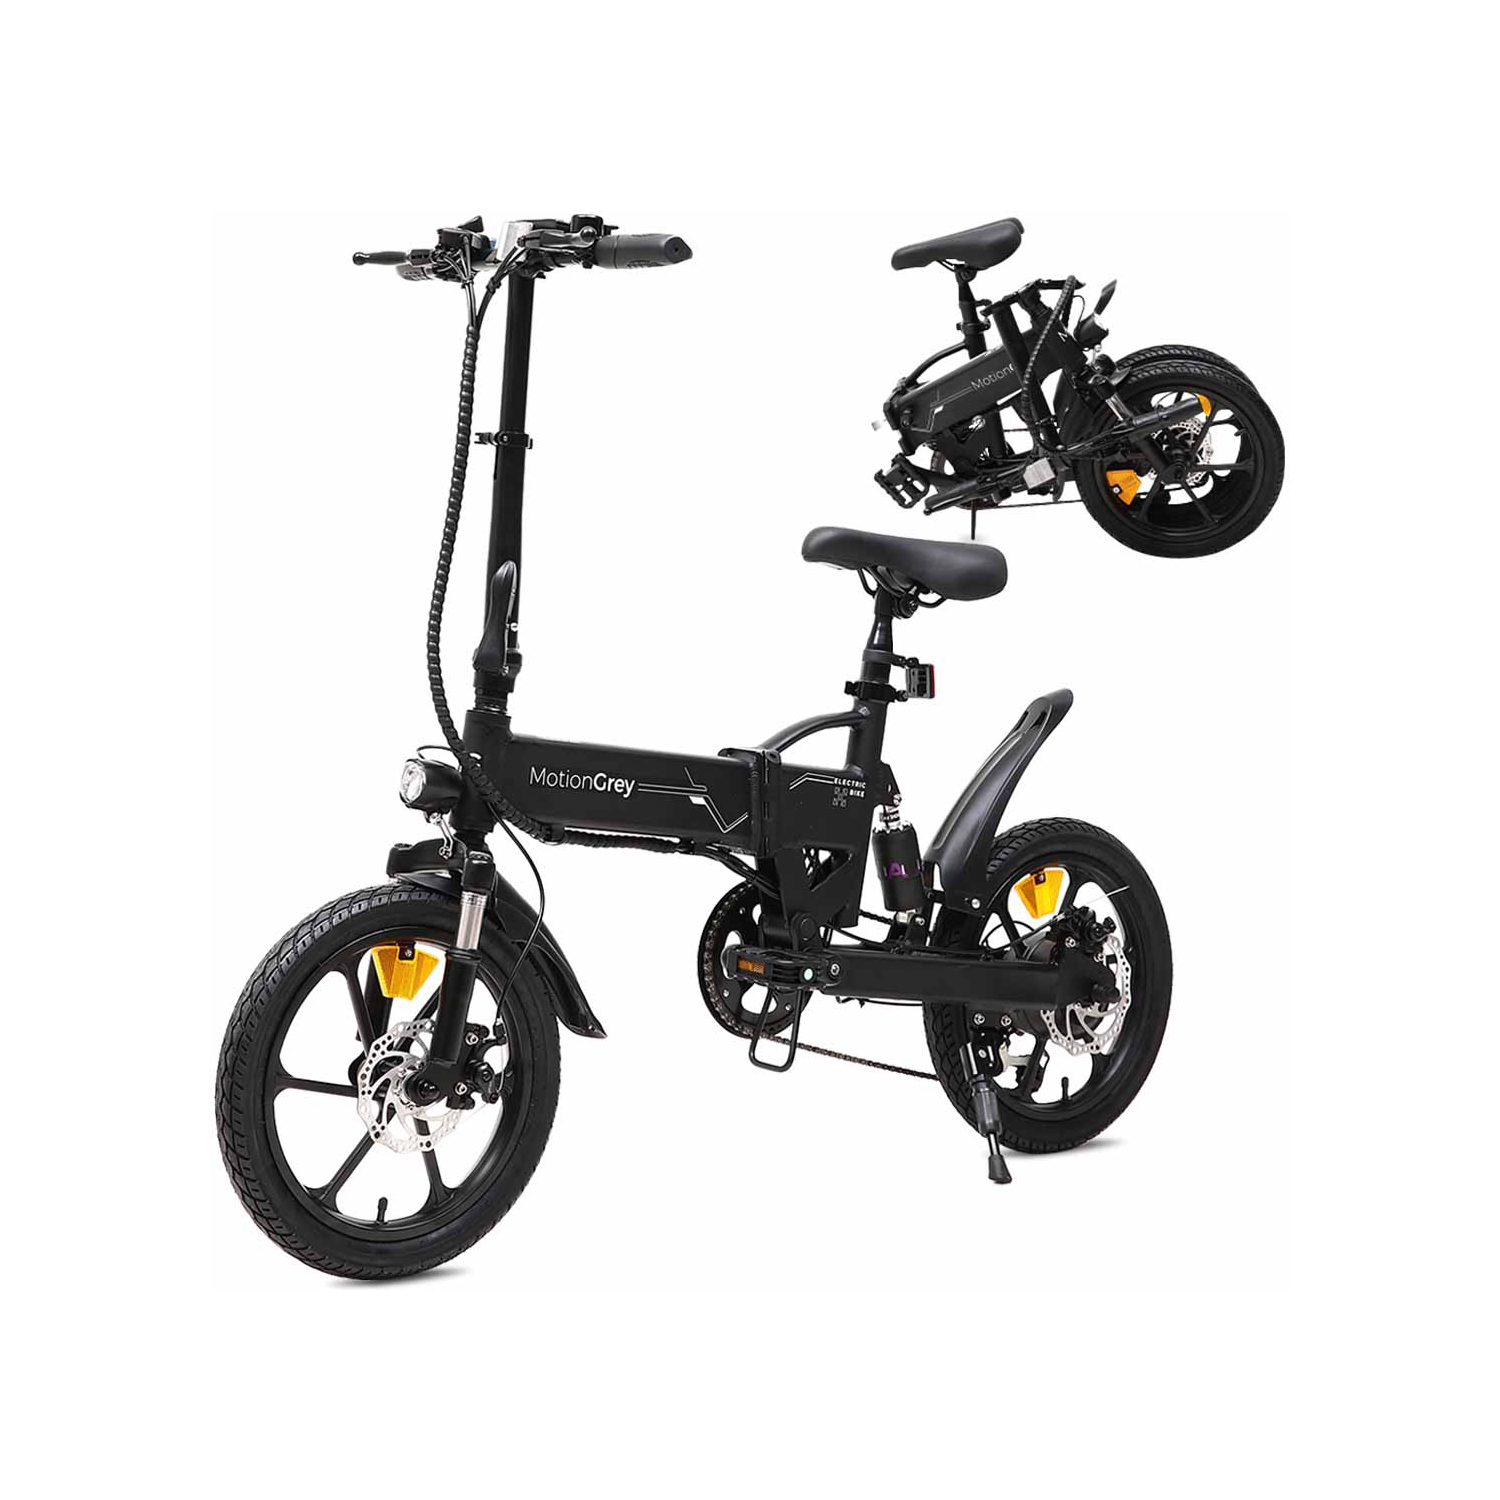 MotionGrey Electric Bike for Adults, Sturdy Foldable Compact Ebikes for Adults, 25km Long Range Electric Bicycle, 30km/h Top Speed, 350 W Motor, 7.8AH Battery, 16 Inch Wheels